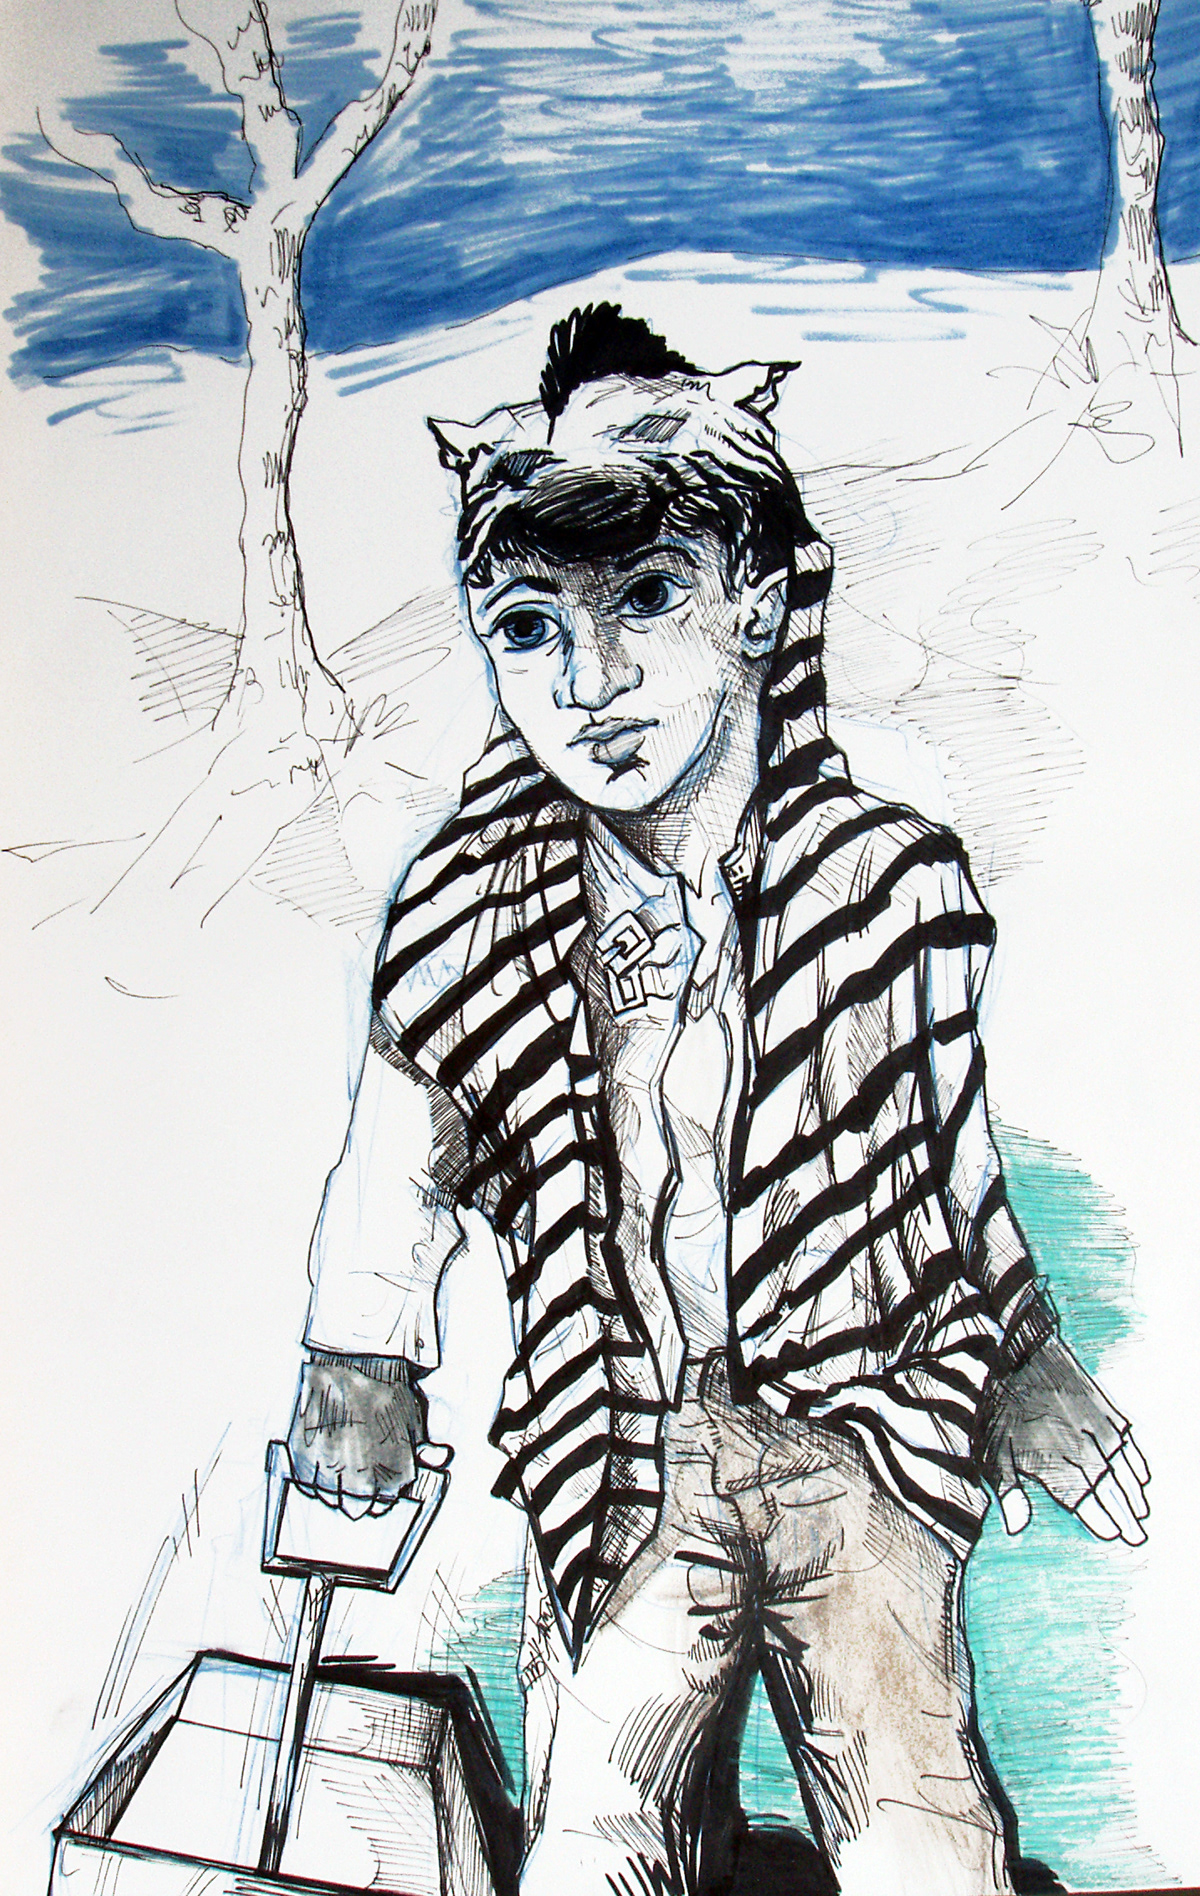 rene capone capone queer art gay art male figure